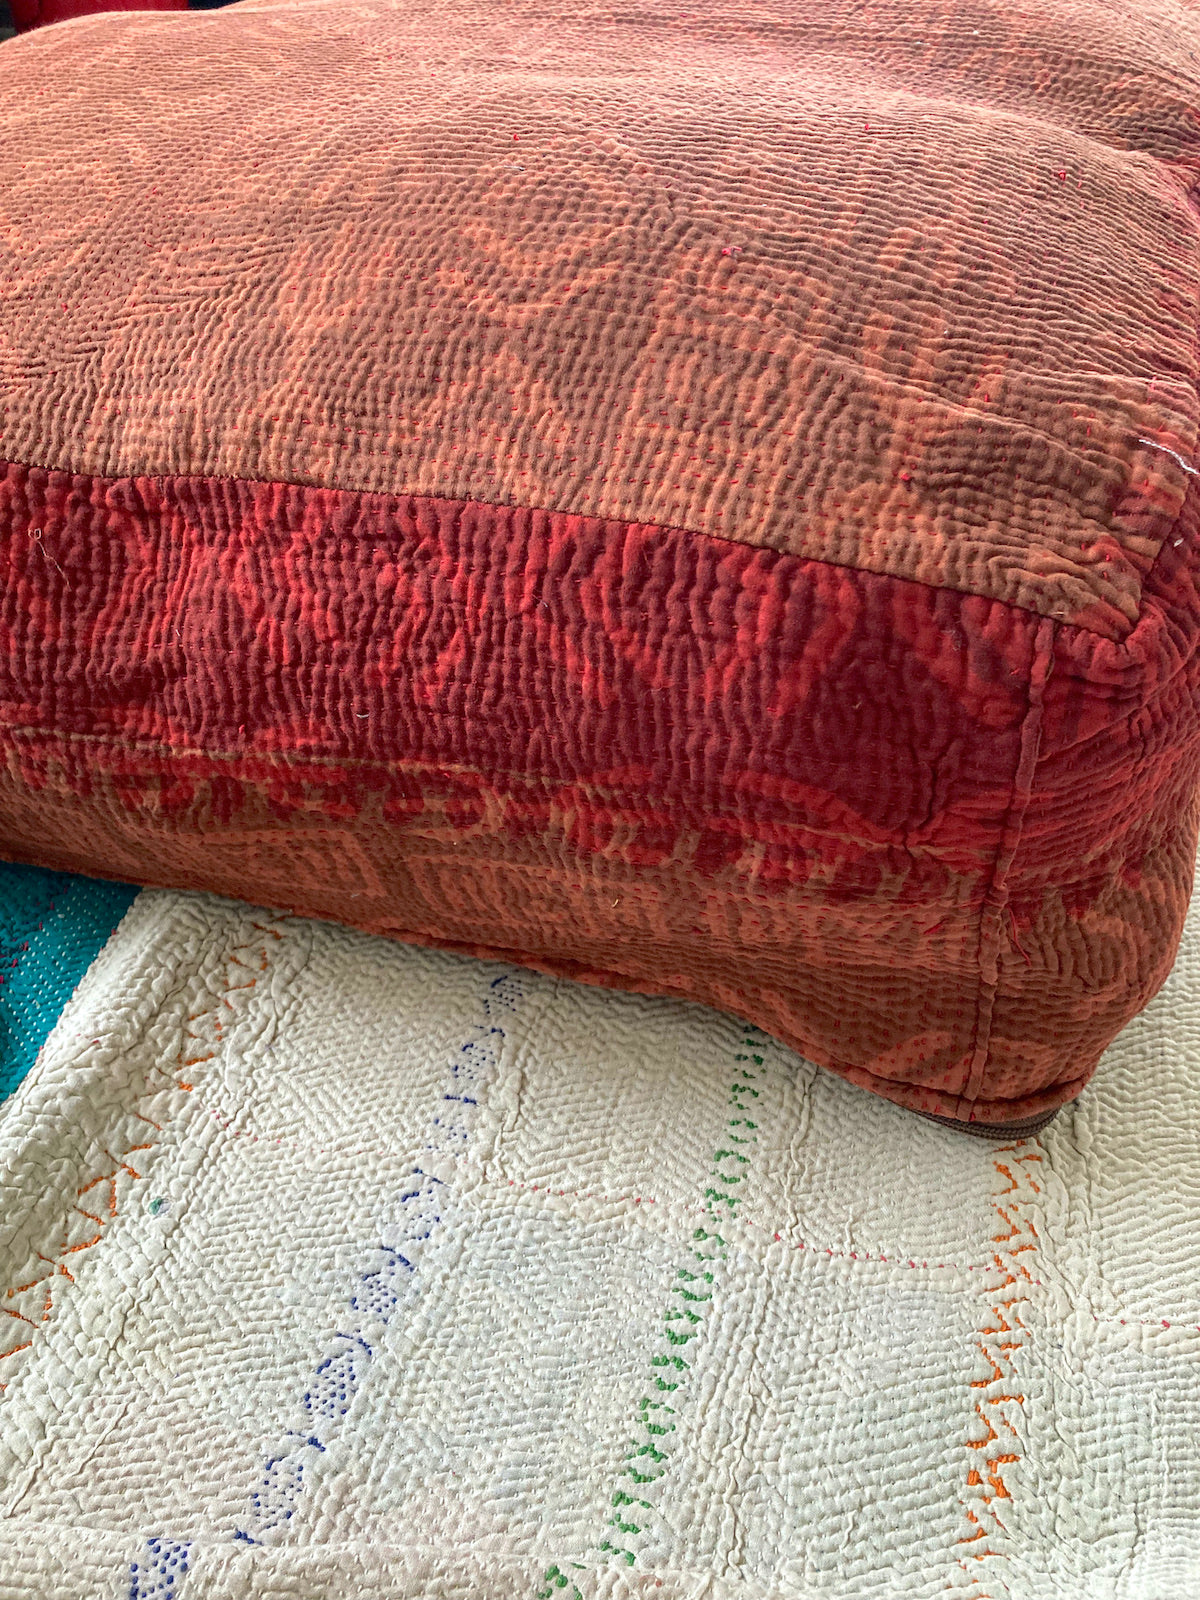 Vintage Natural Dyed Quilt Floor Cushion Pouf  #118